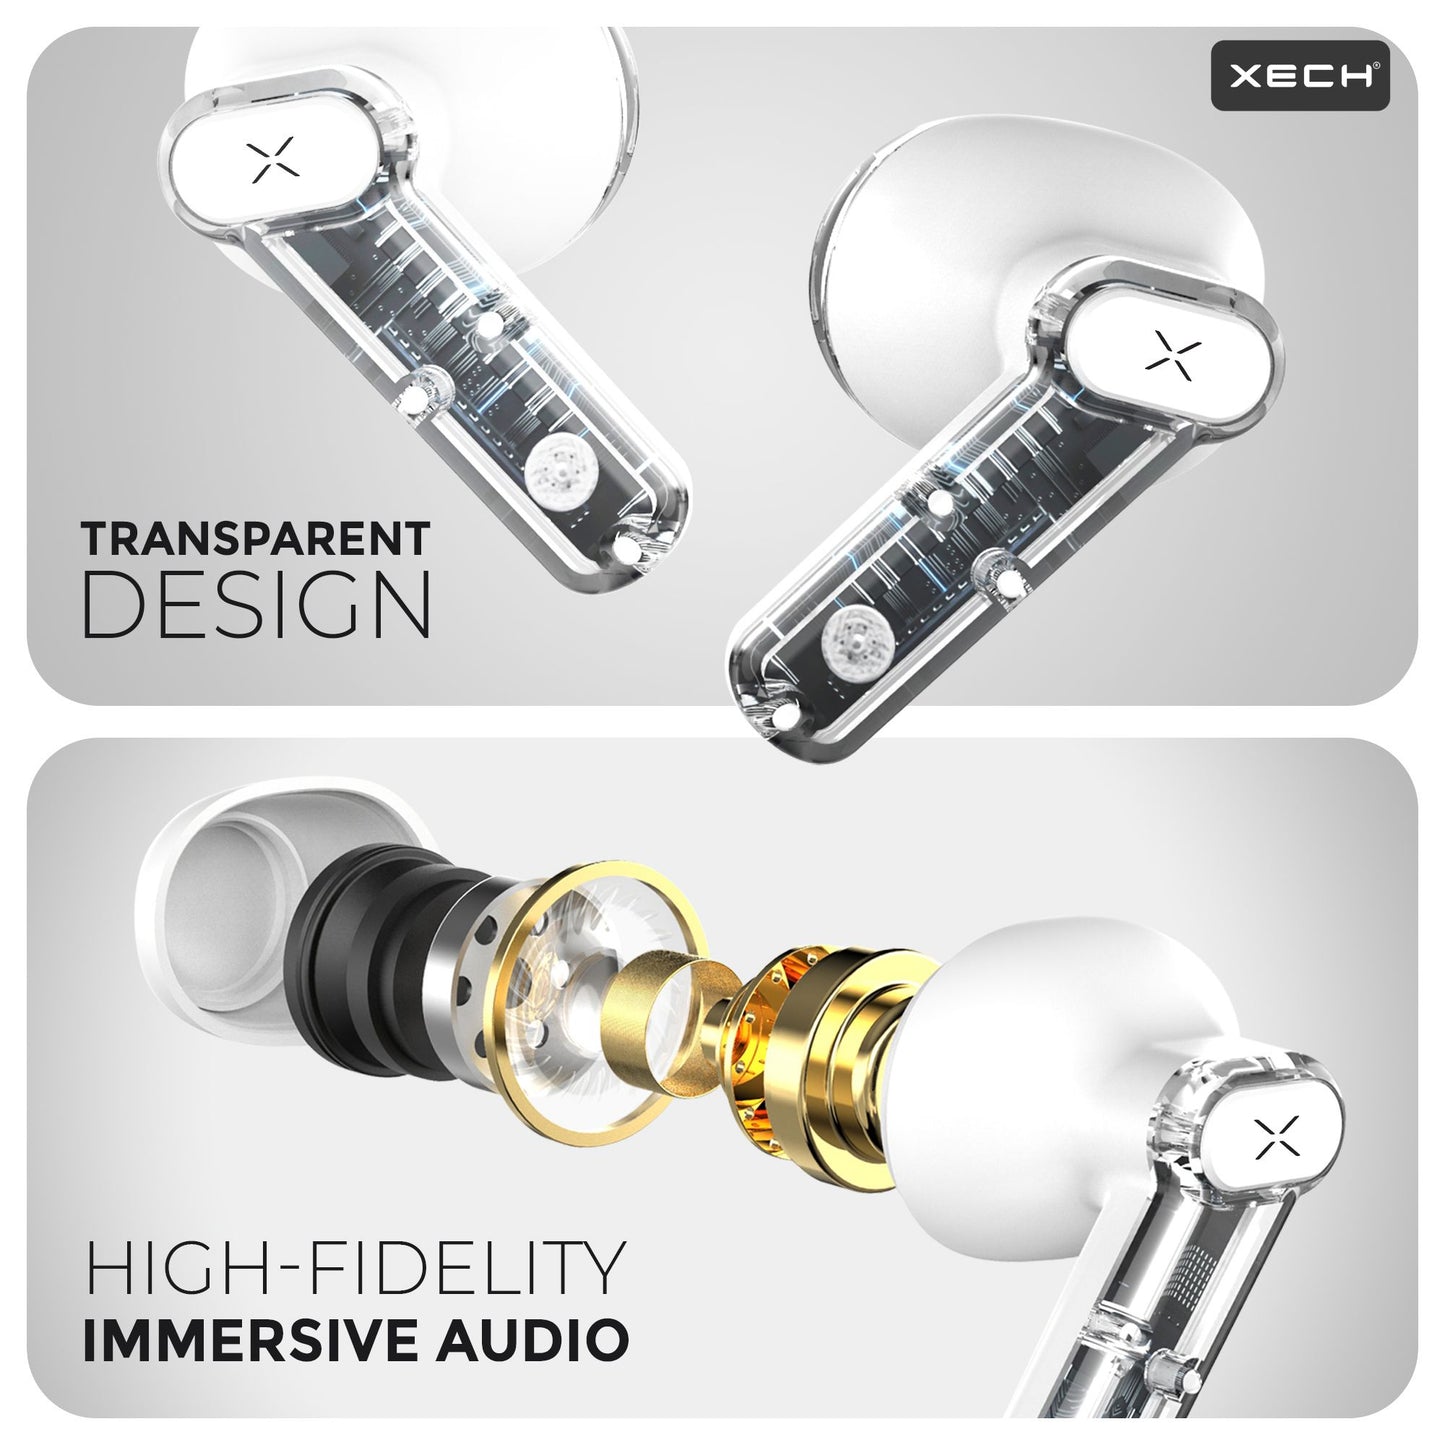 India's best looking multifunctional TWS earpods with powerbank and a transparent body developed by XECH